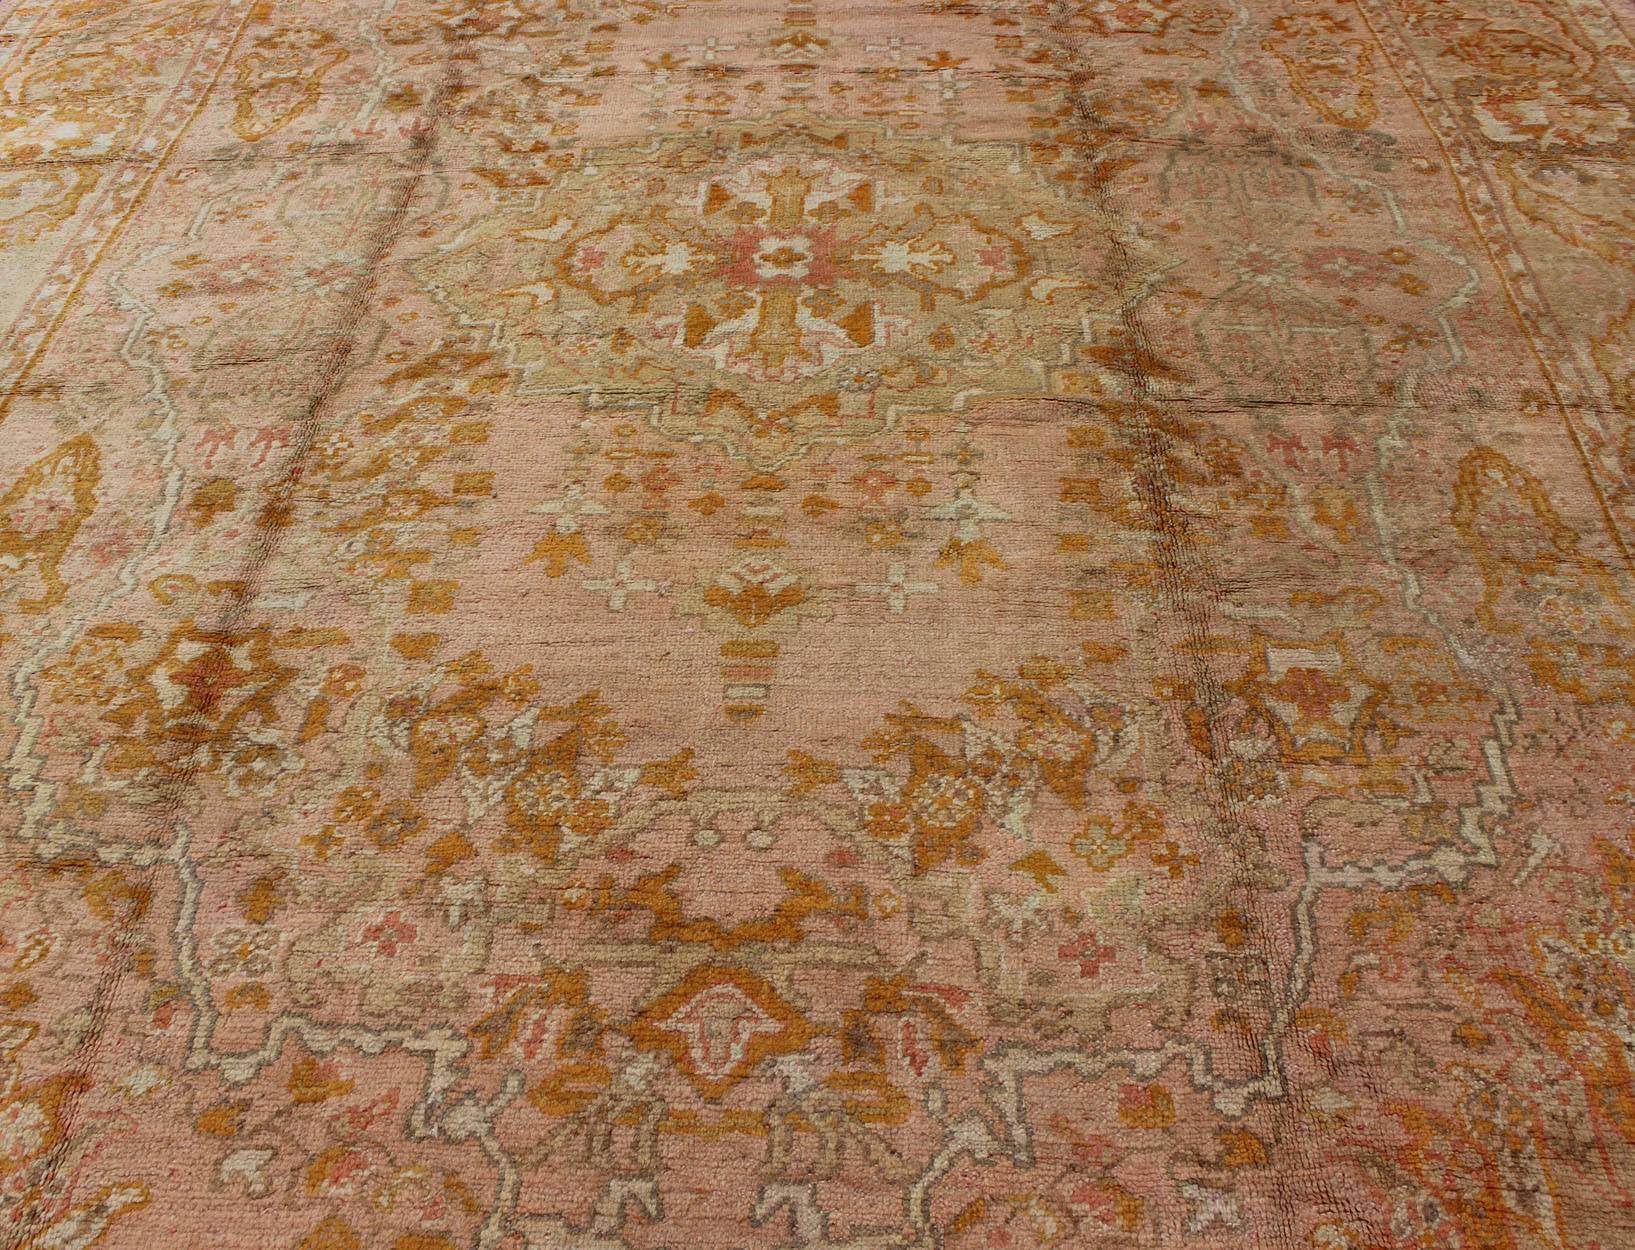 Early 20th Century Antique Oushak Rug with Floral Pattern in Pink, Orange and Light Green  For Sale